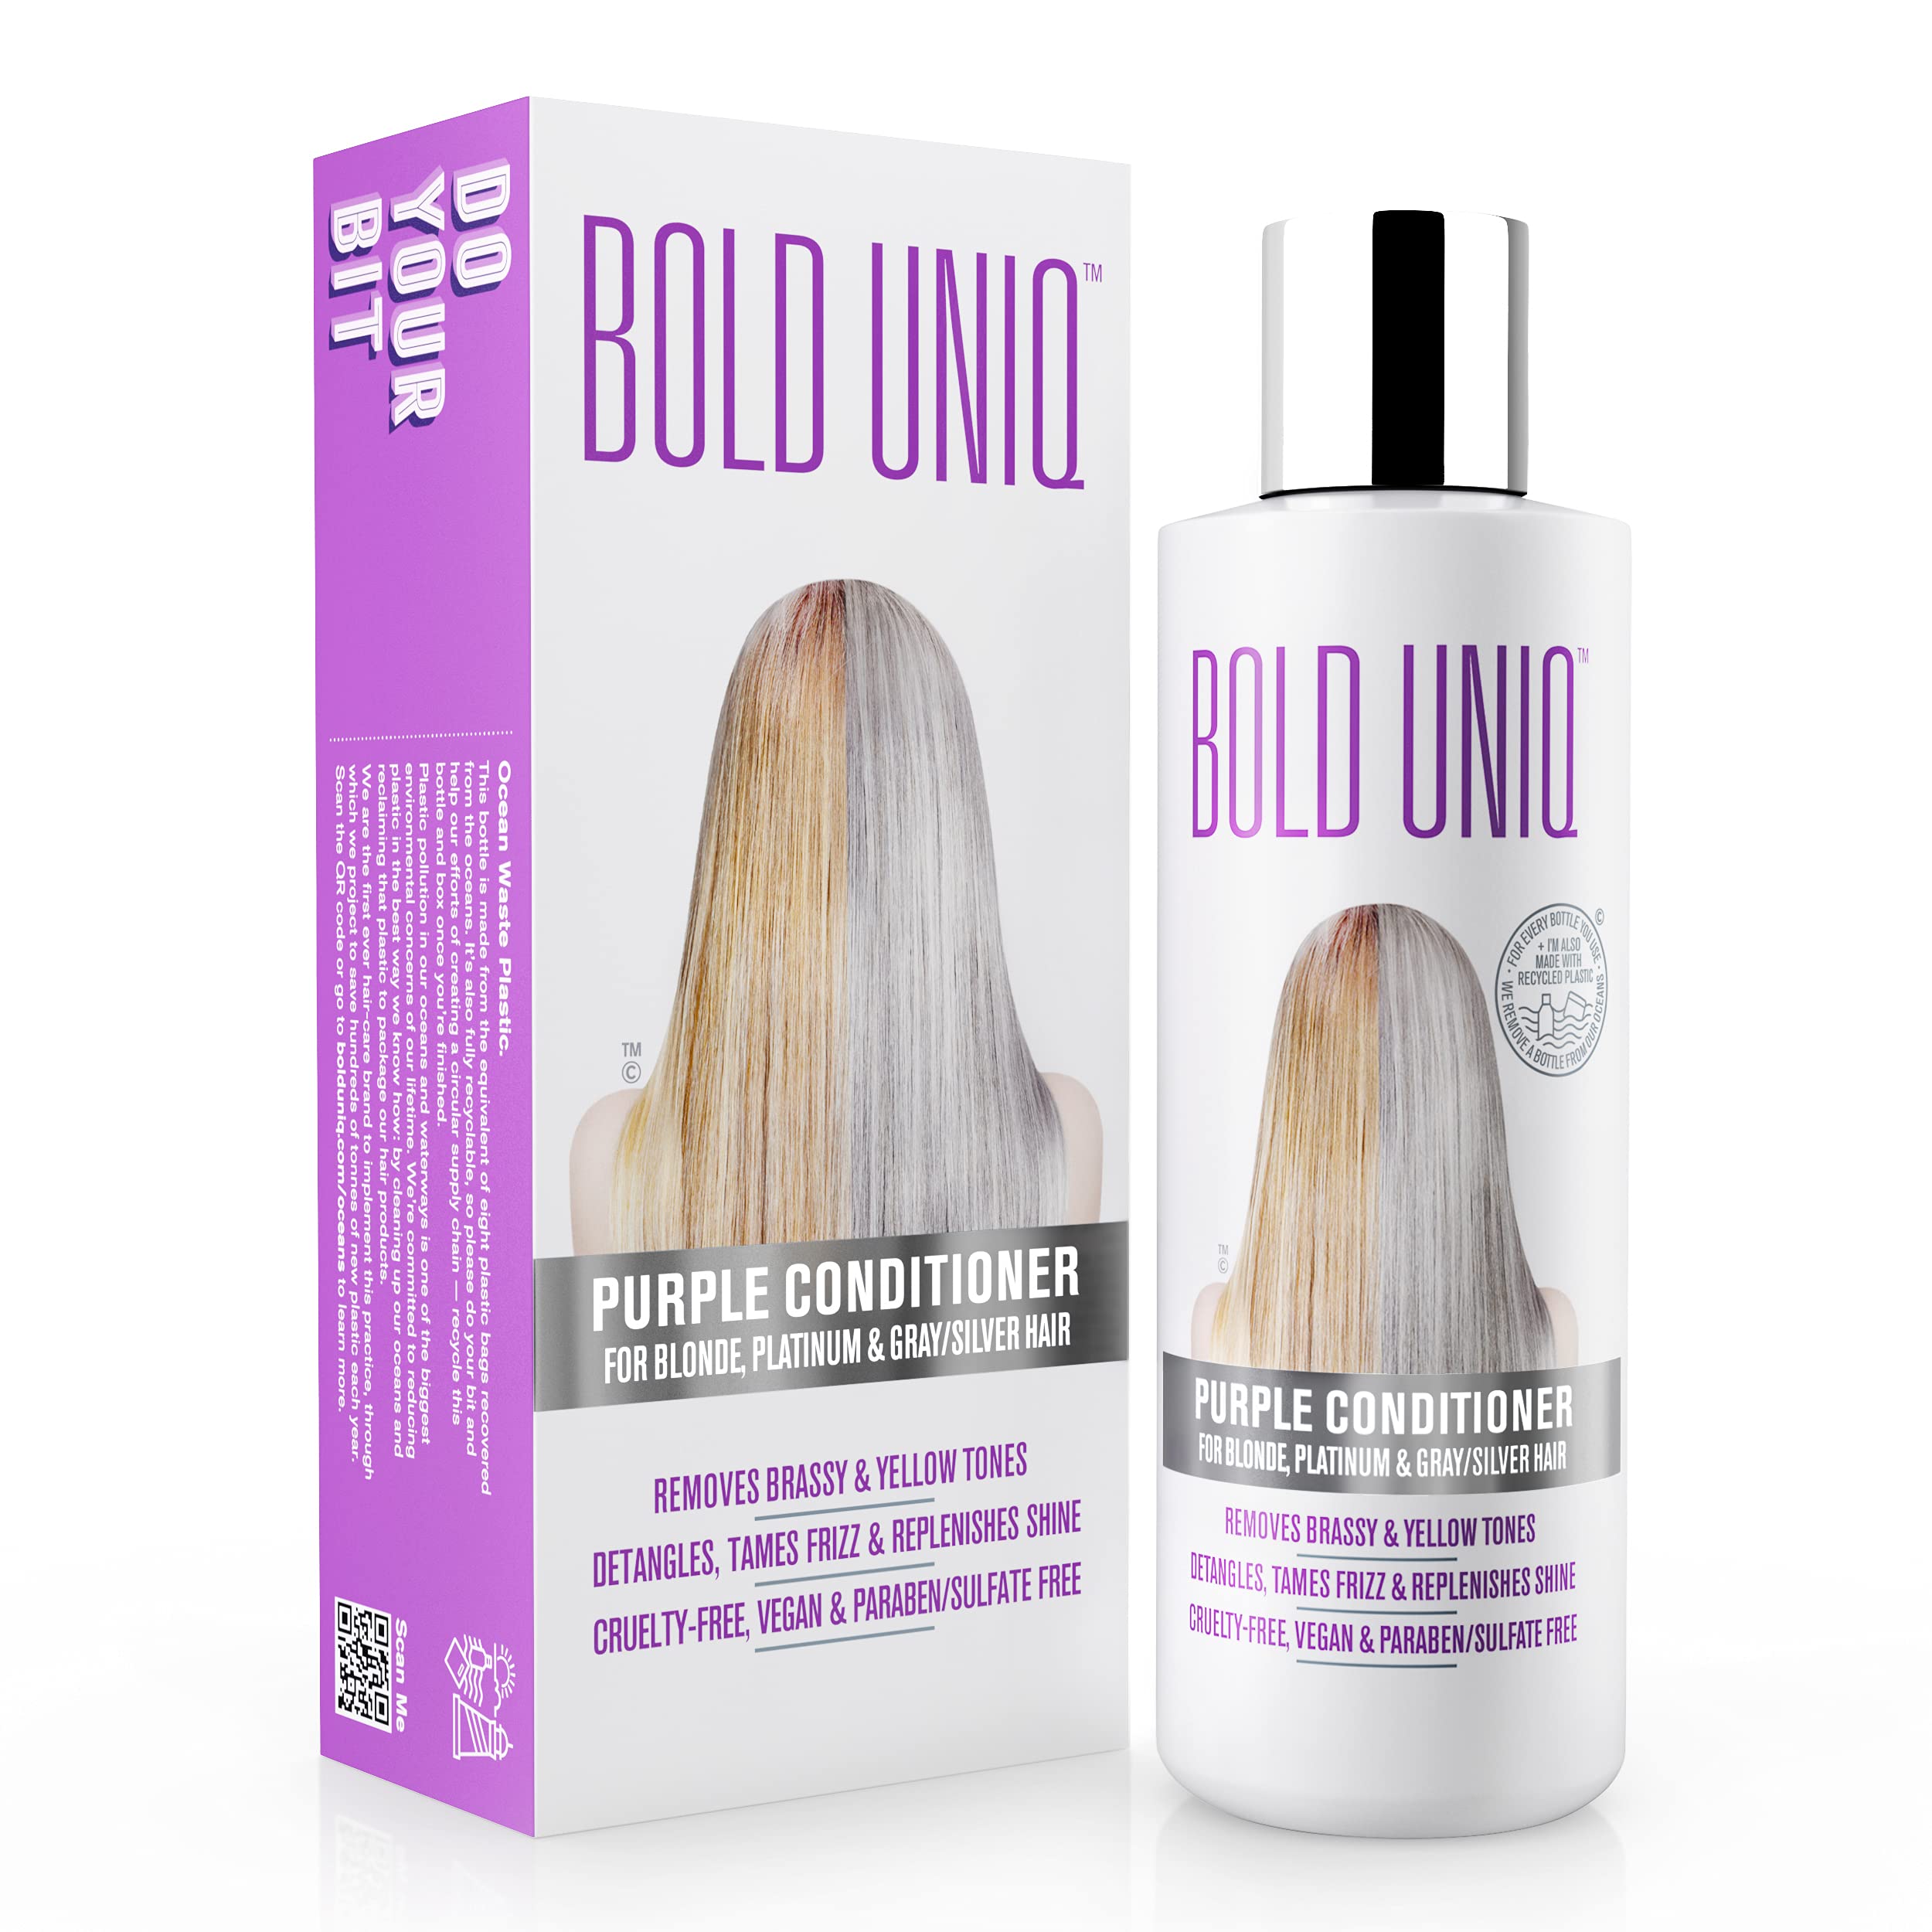 Purple Conditioner for Blonde, Platinum & Gray/Silver Hair. Reduce Brassy Yellow Tones. Toner for Bleached & Highlighted Hair - Moisturises - Cruelty Free, No Parabens or Sulphates - 237 ml